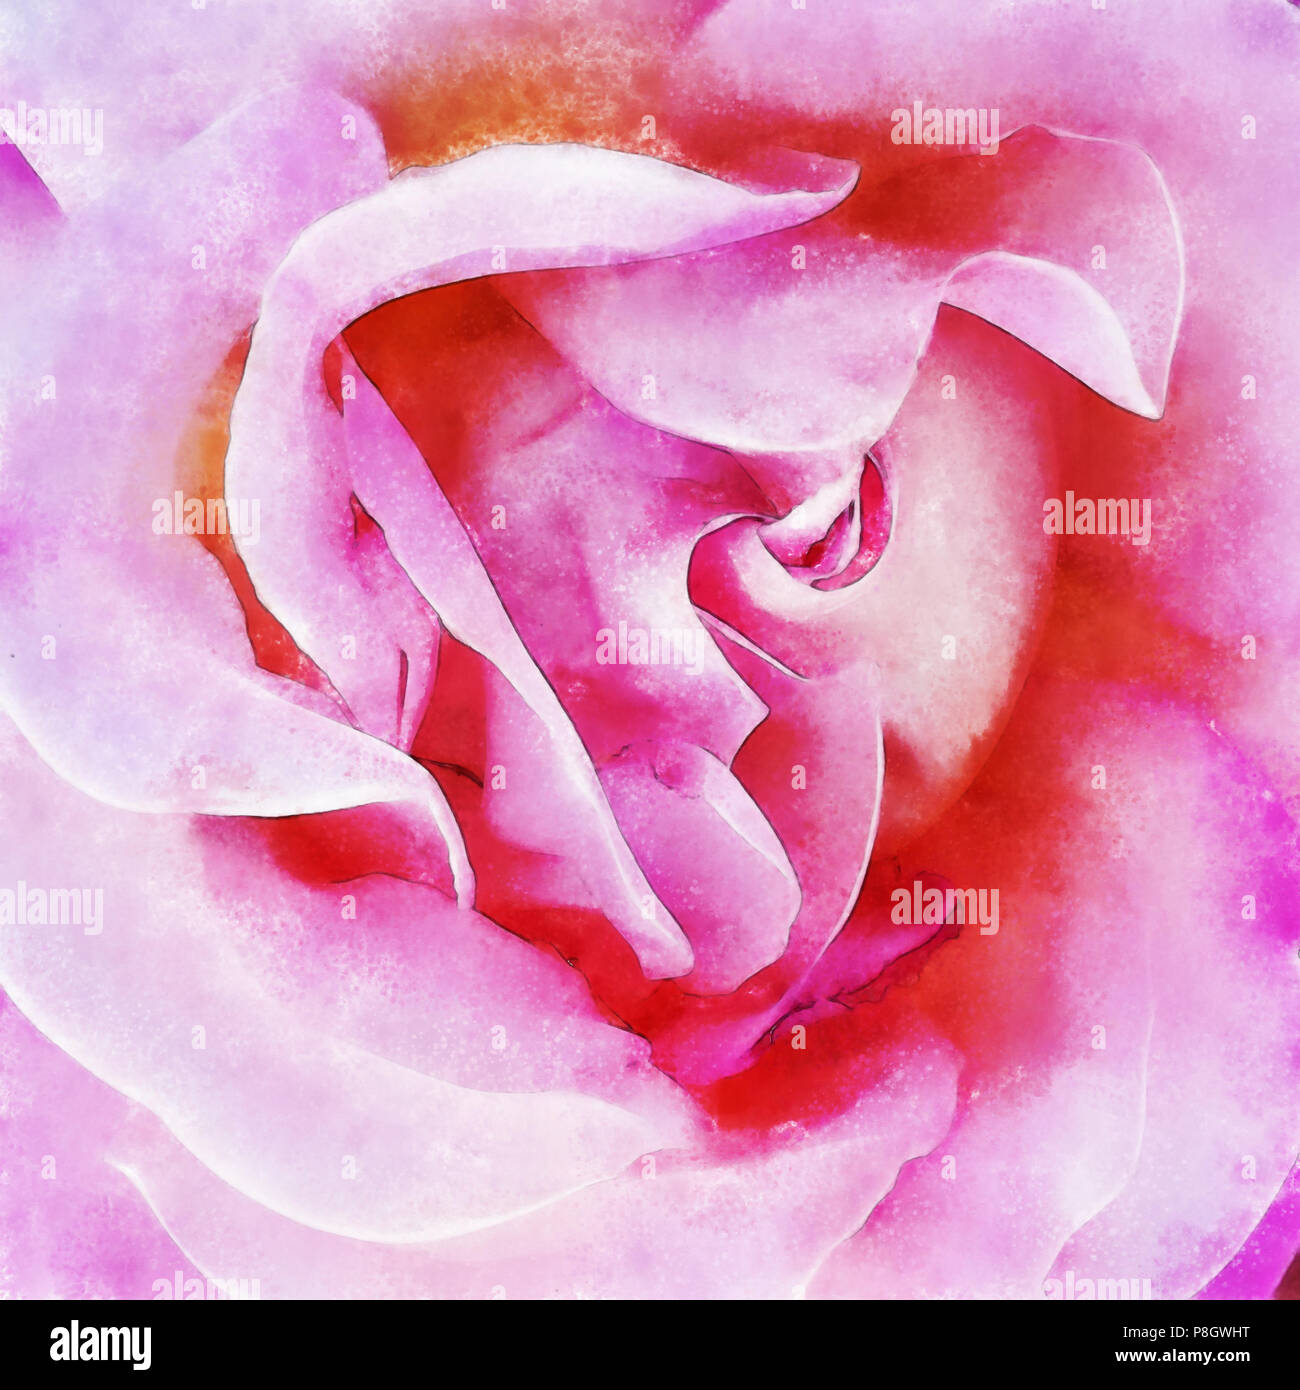 Closeup pink rose fine art, digital painting created by hand using several techniques to resemble watercolor on paper. Stock Photo